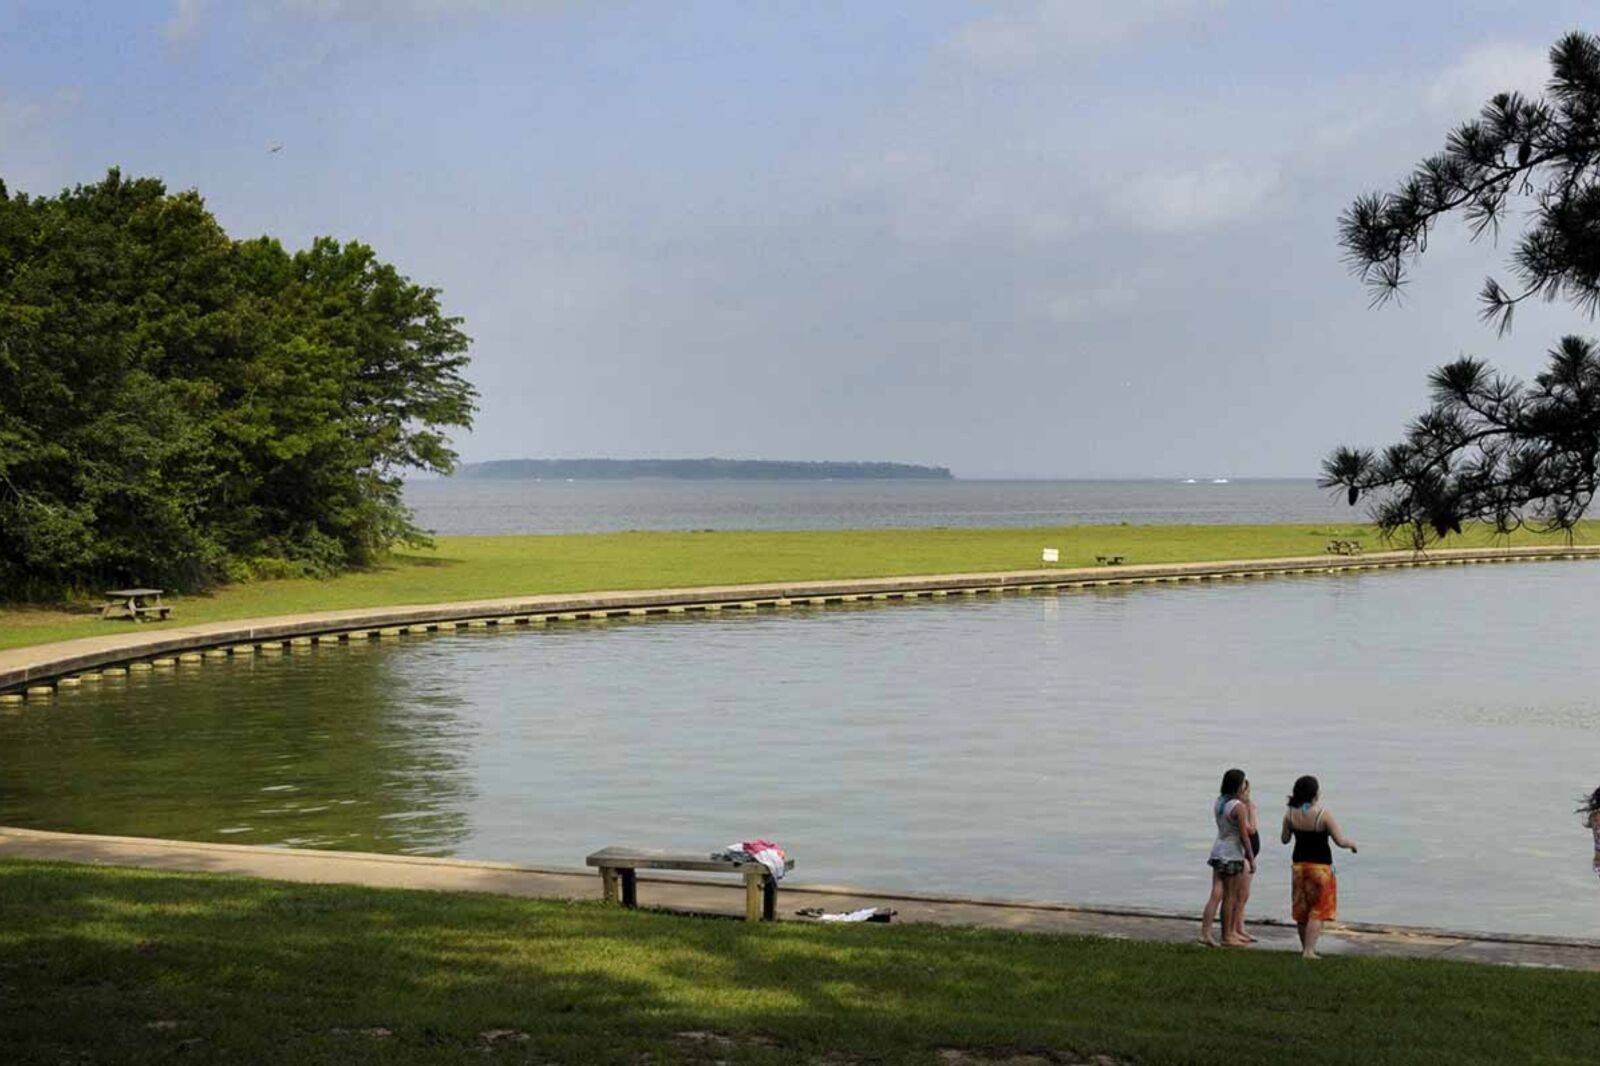 People standing by Lake Livingston one of the best places for camping in Houston